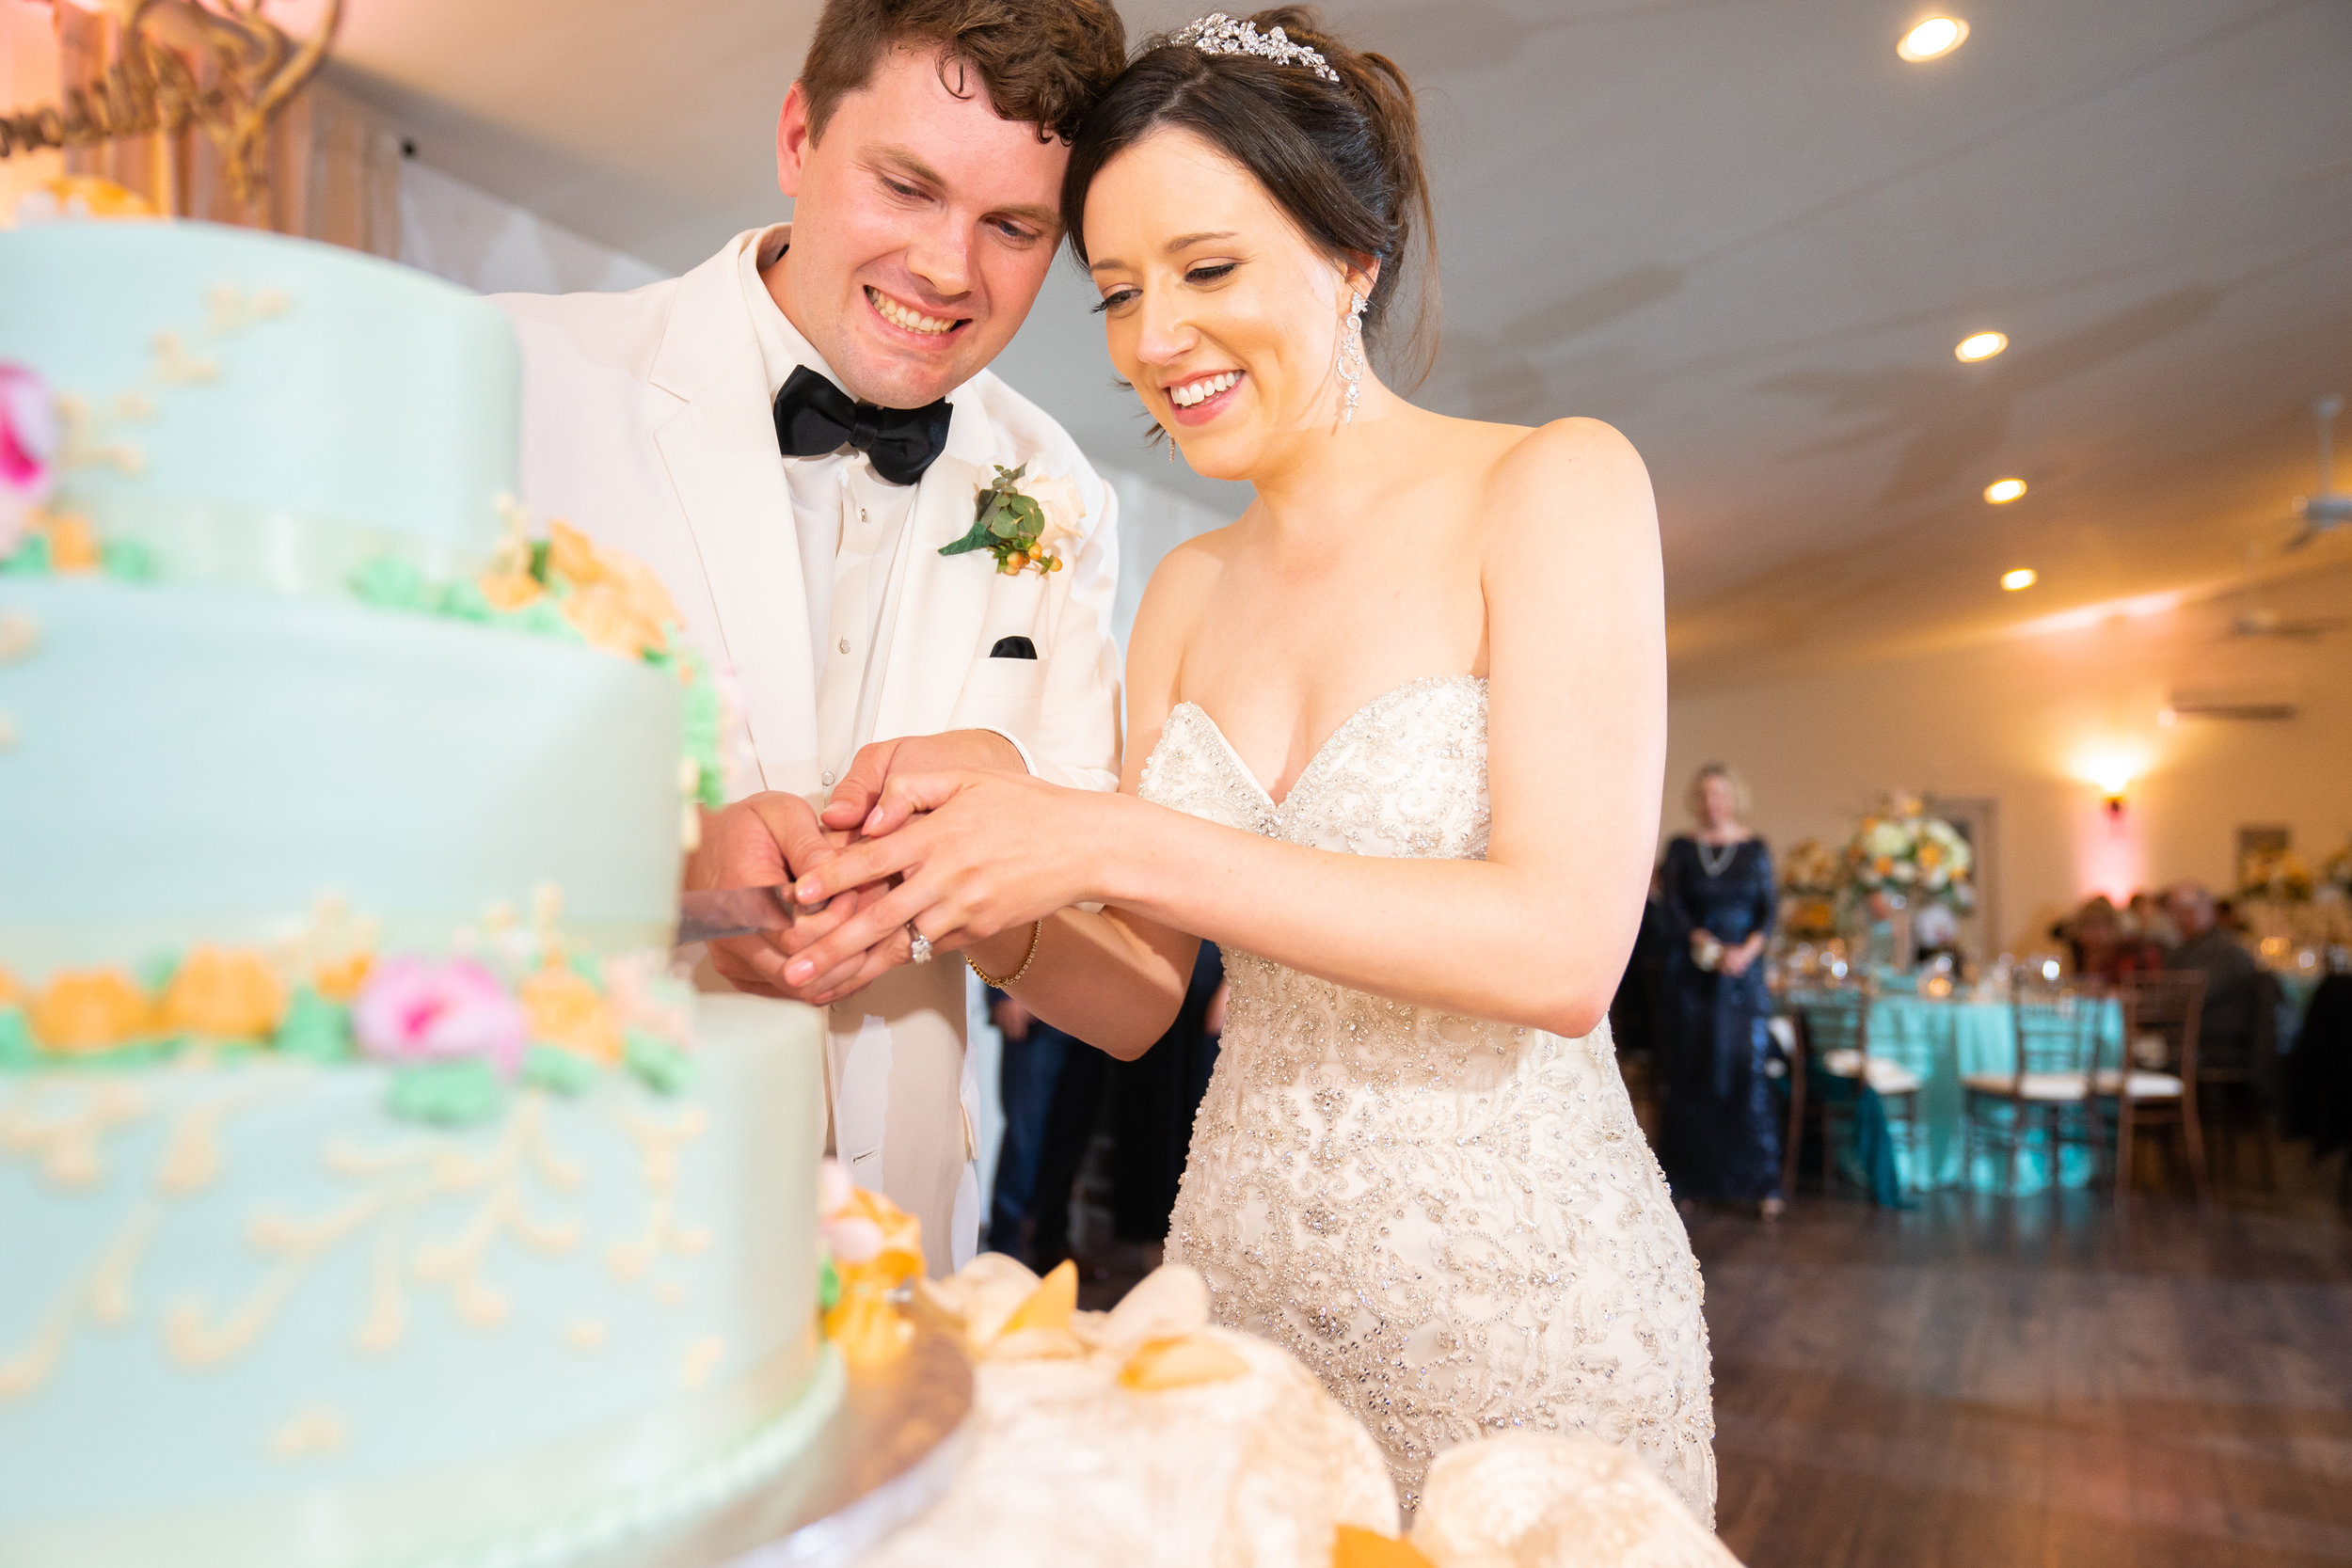 Cake cutting at Harvest House at Lost Creek Winery wedding